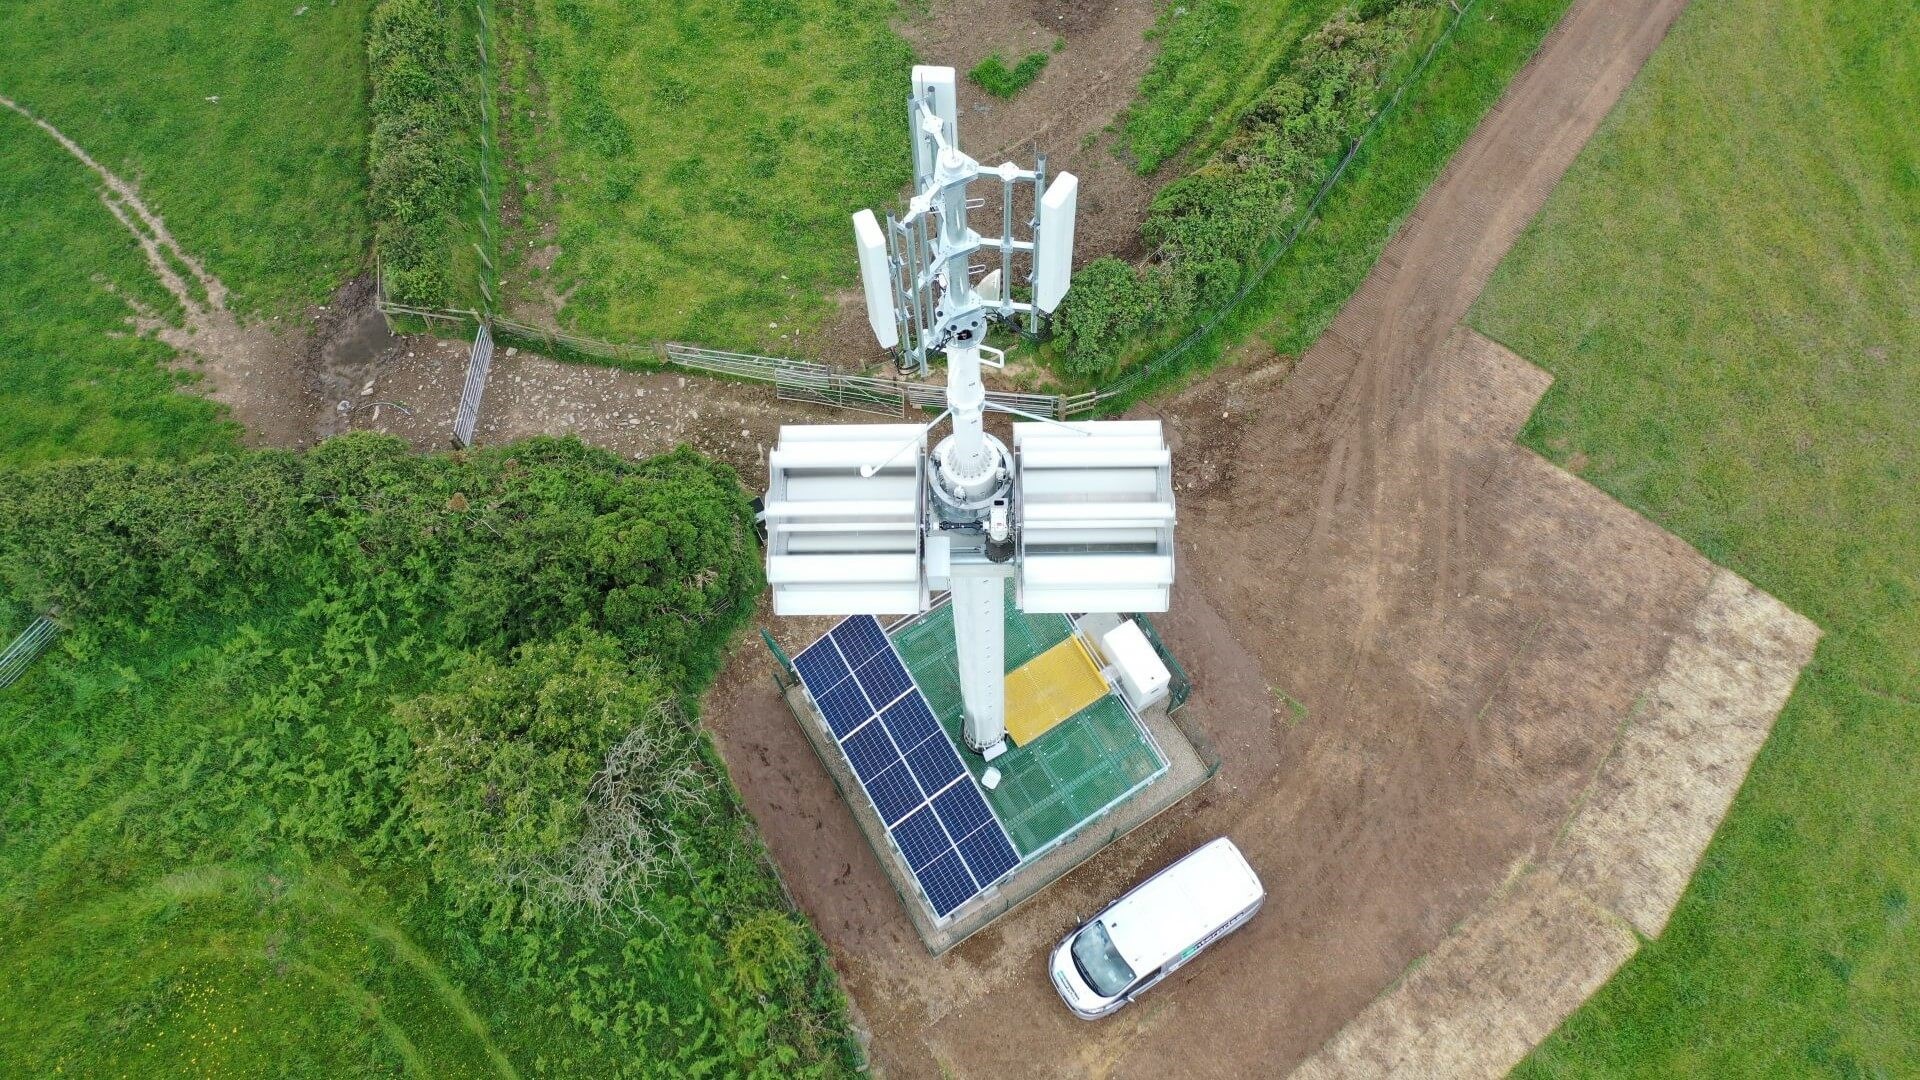 Overhead birds eye view of small wind turnbine with solar panels and battery storage at base